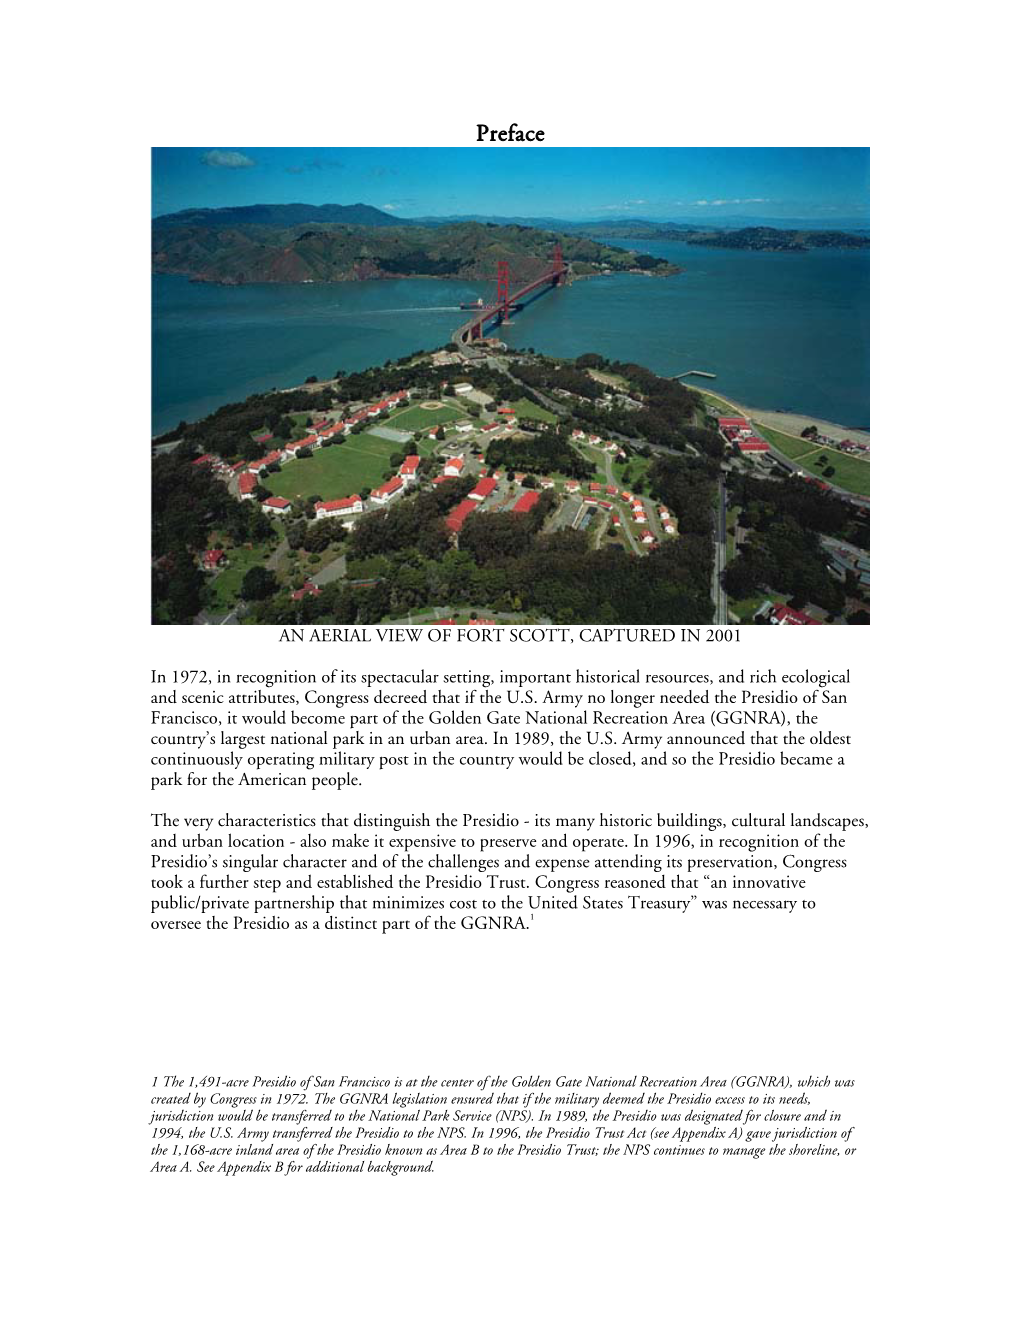 Presidio Trust Management Plan: Land Use Policies for Area B of the Presidio of San Francisco (PTMP, Or Plan)